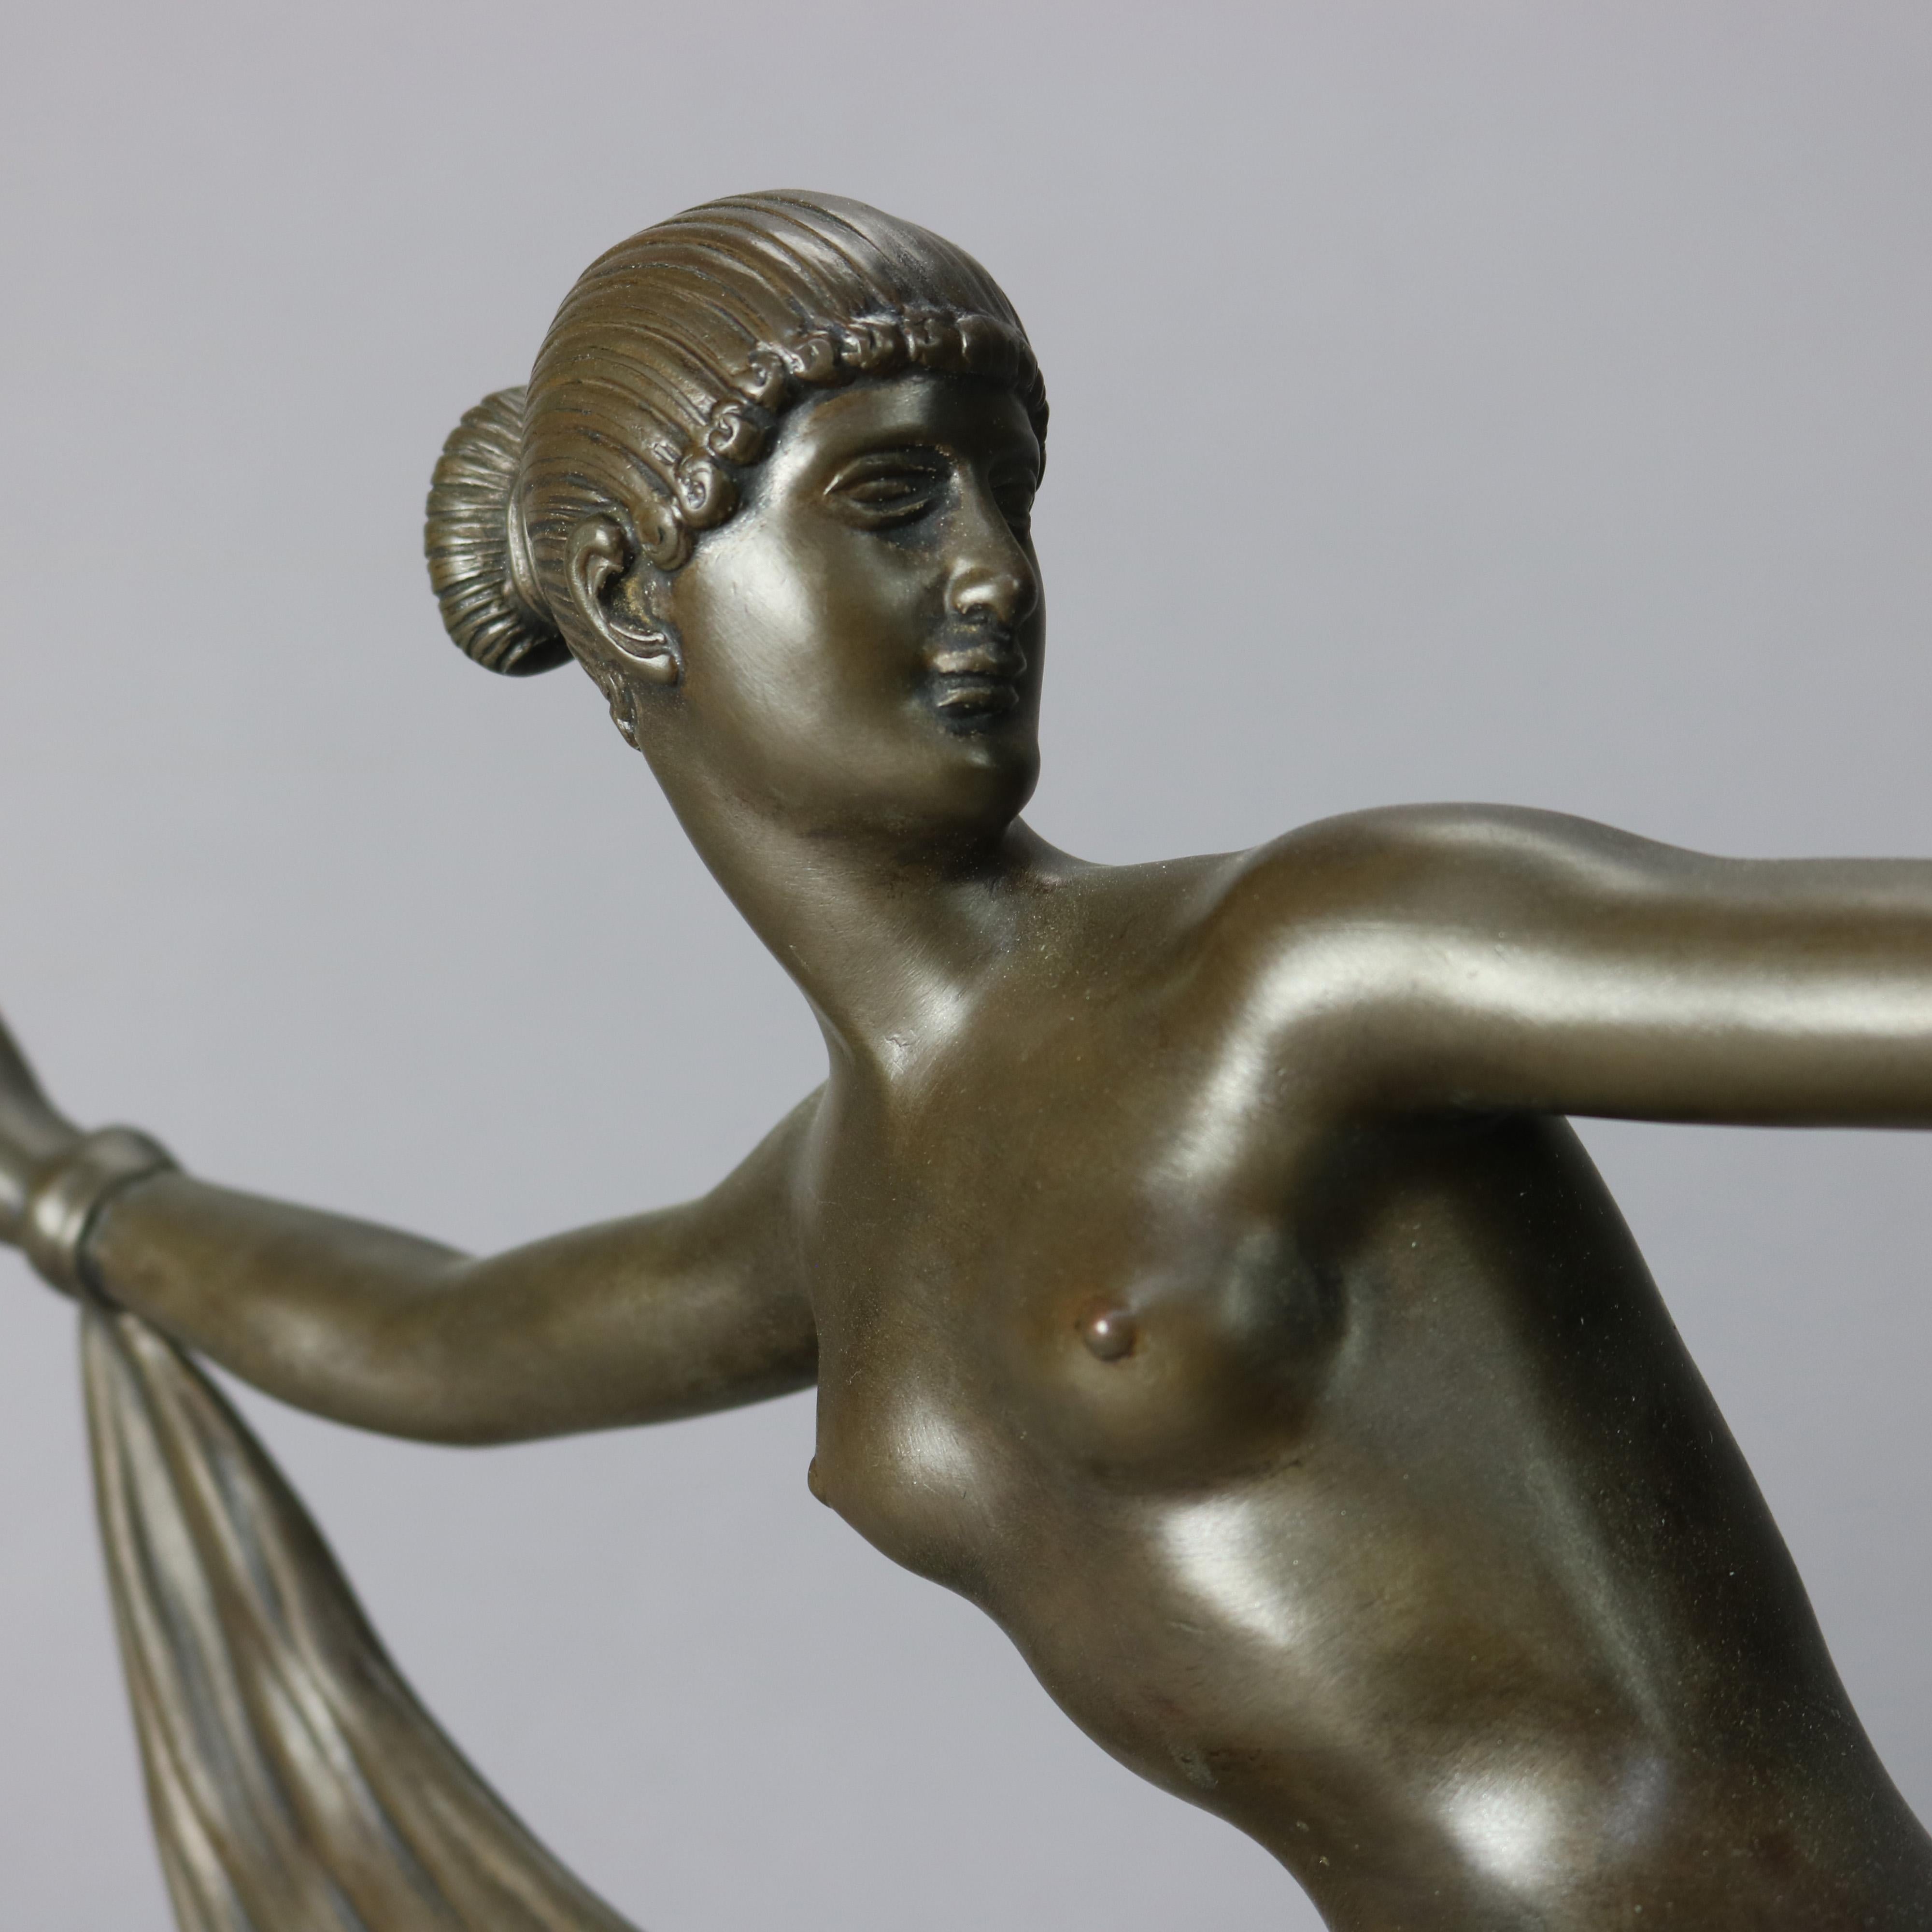 A French Art Deco sculpture depicts a dancing woman with scarf; seated on marble plinth; 20th century

Measures - 14.25